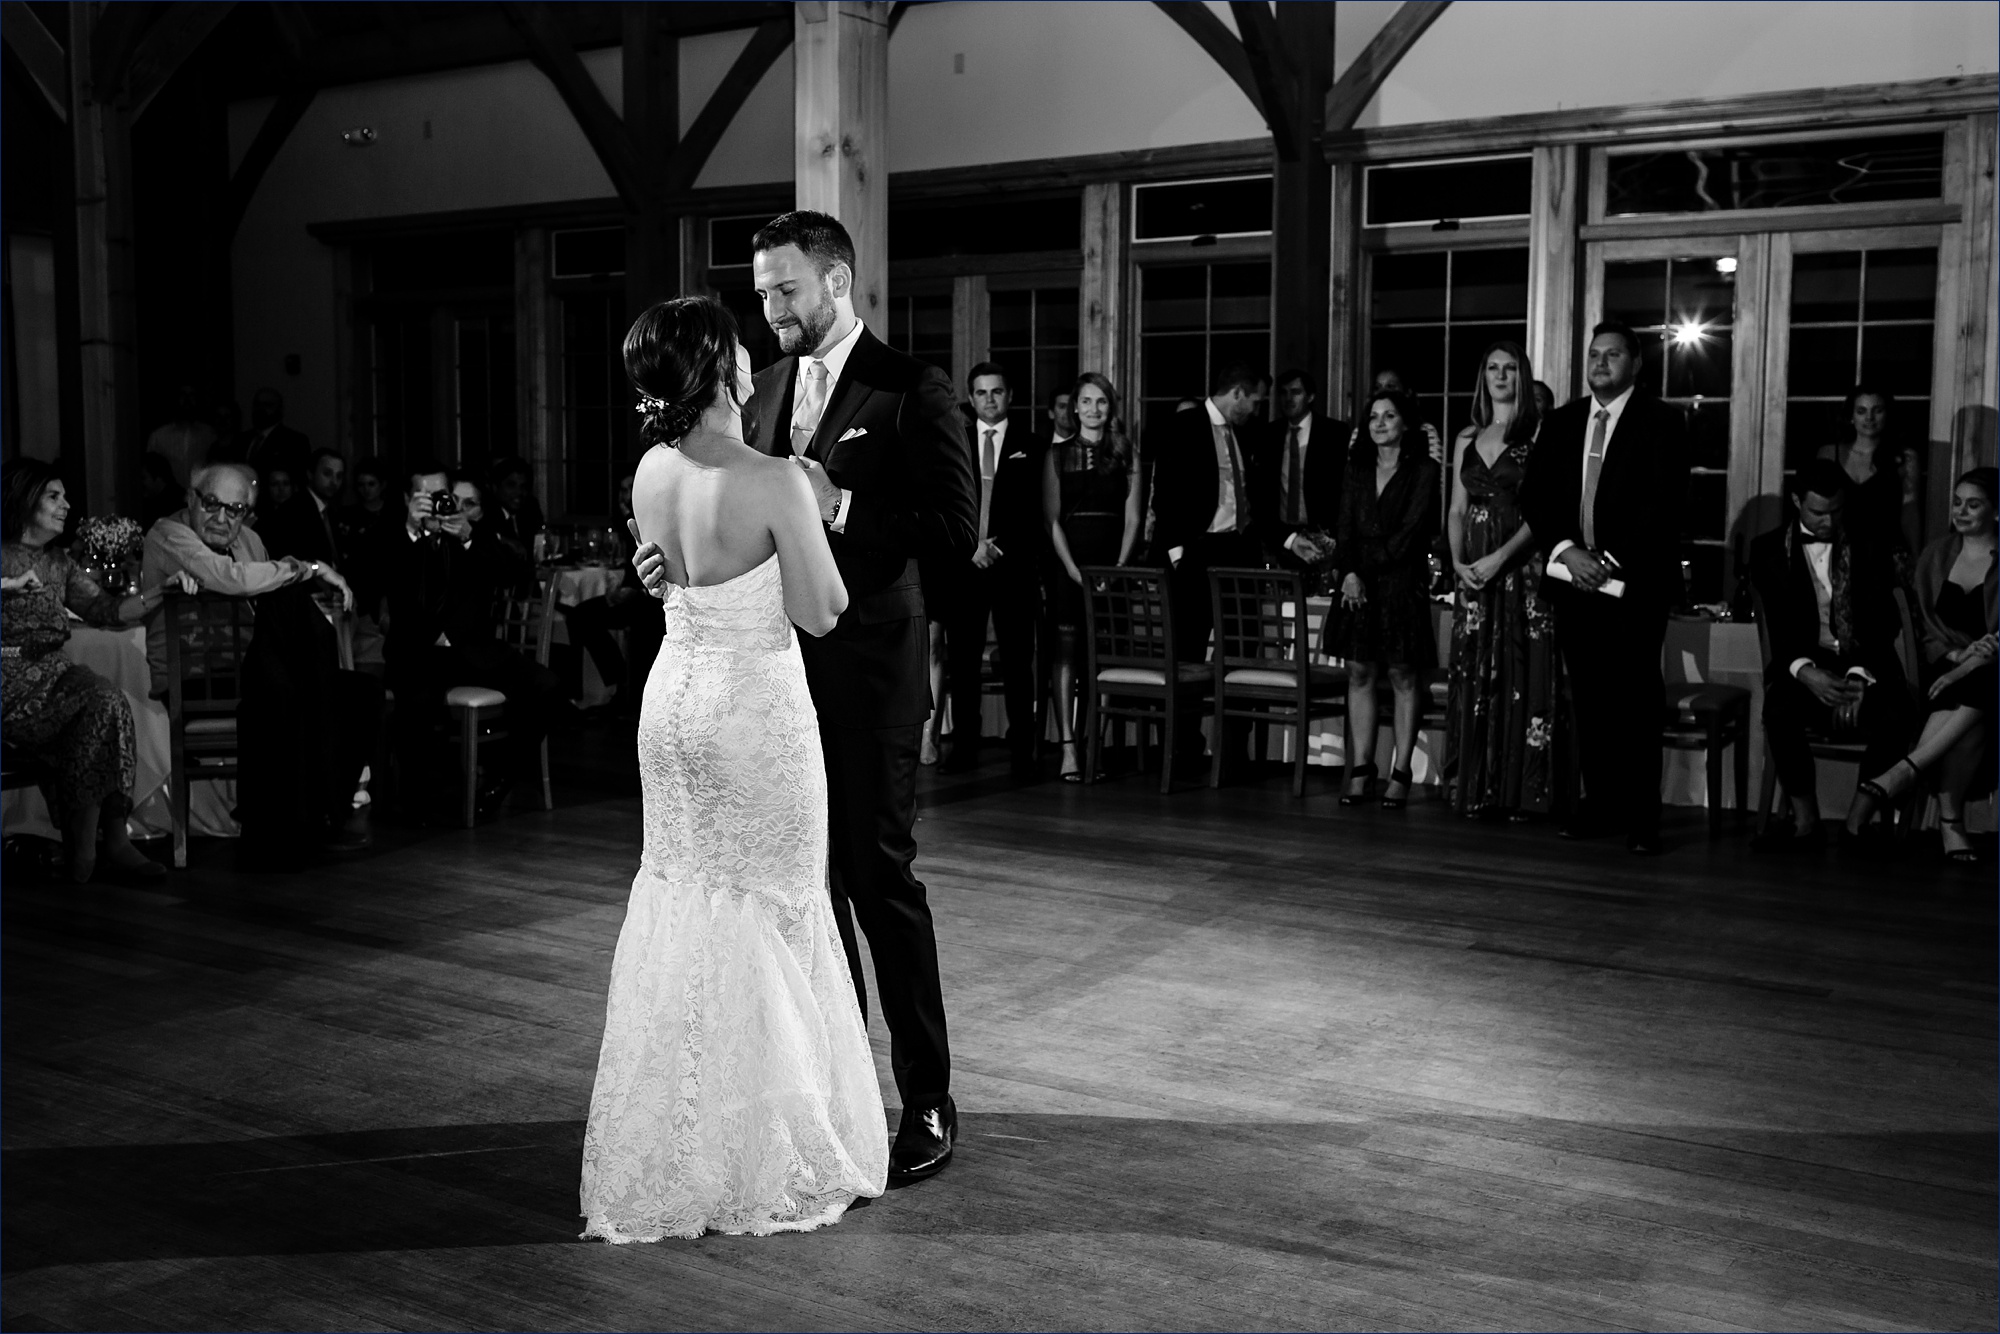 The couple dances together at their Maine Wedding reception in a barn